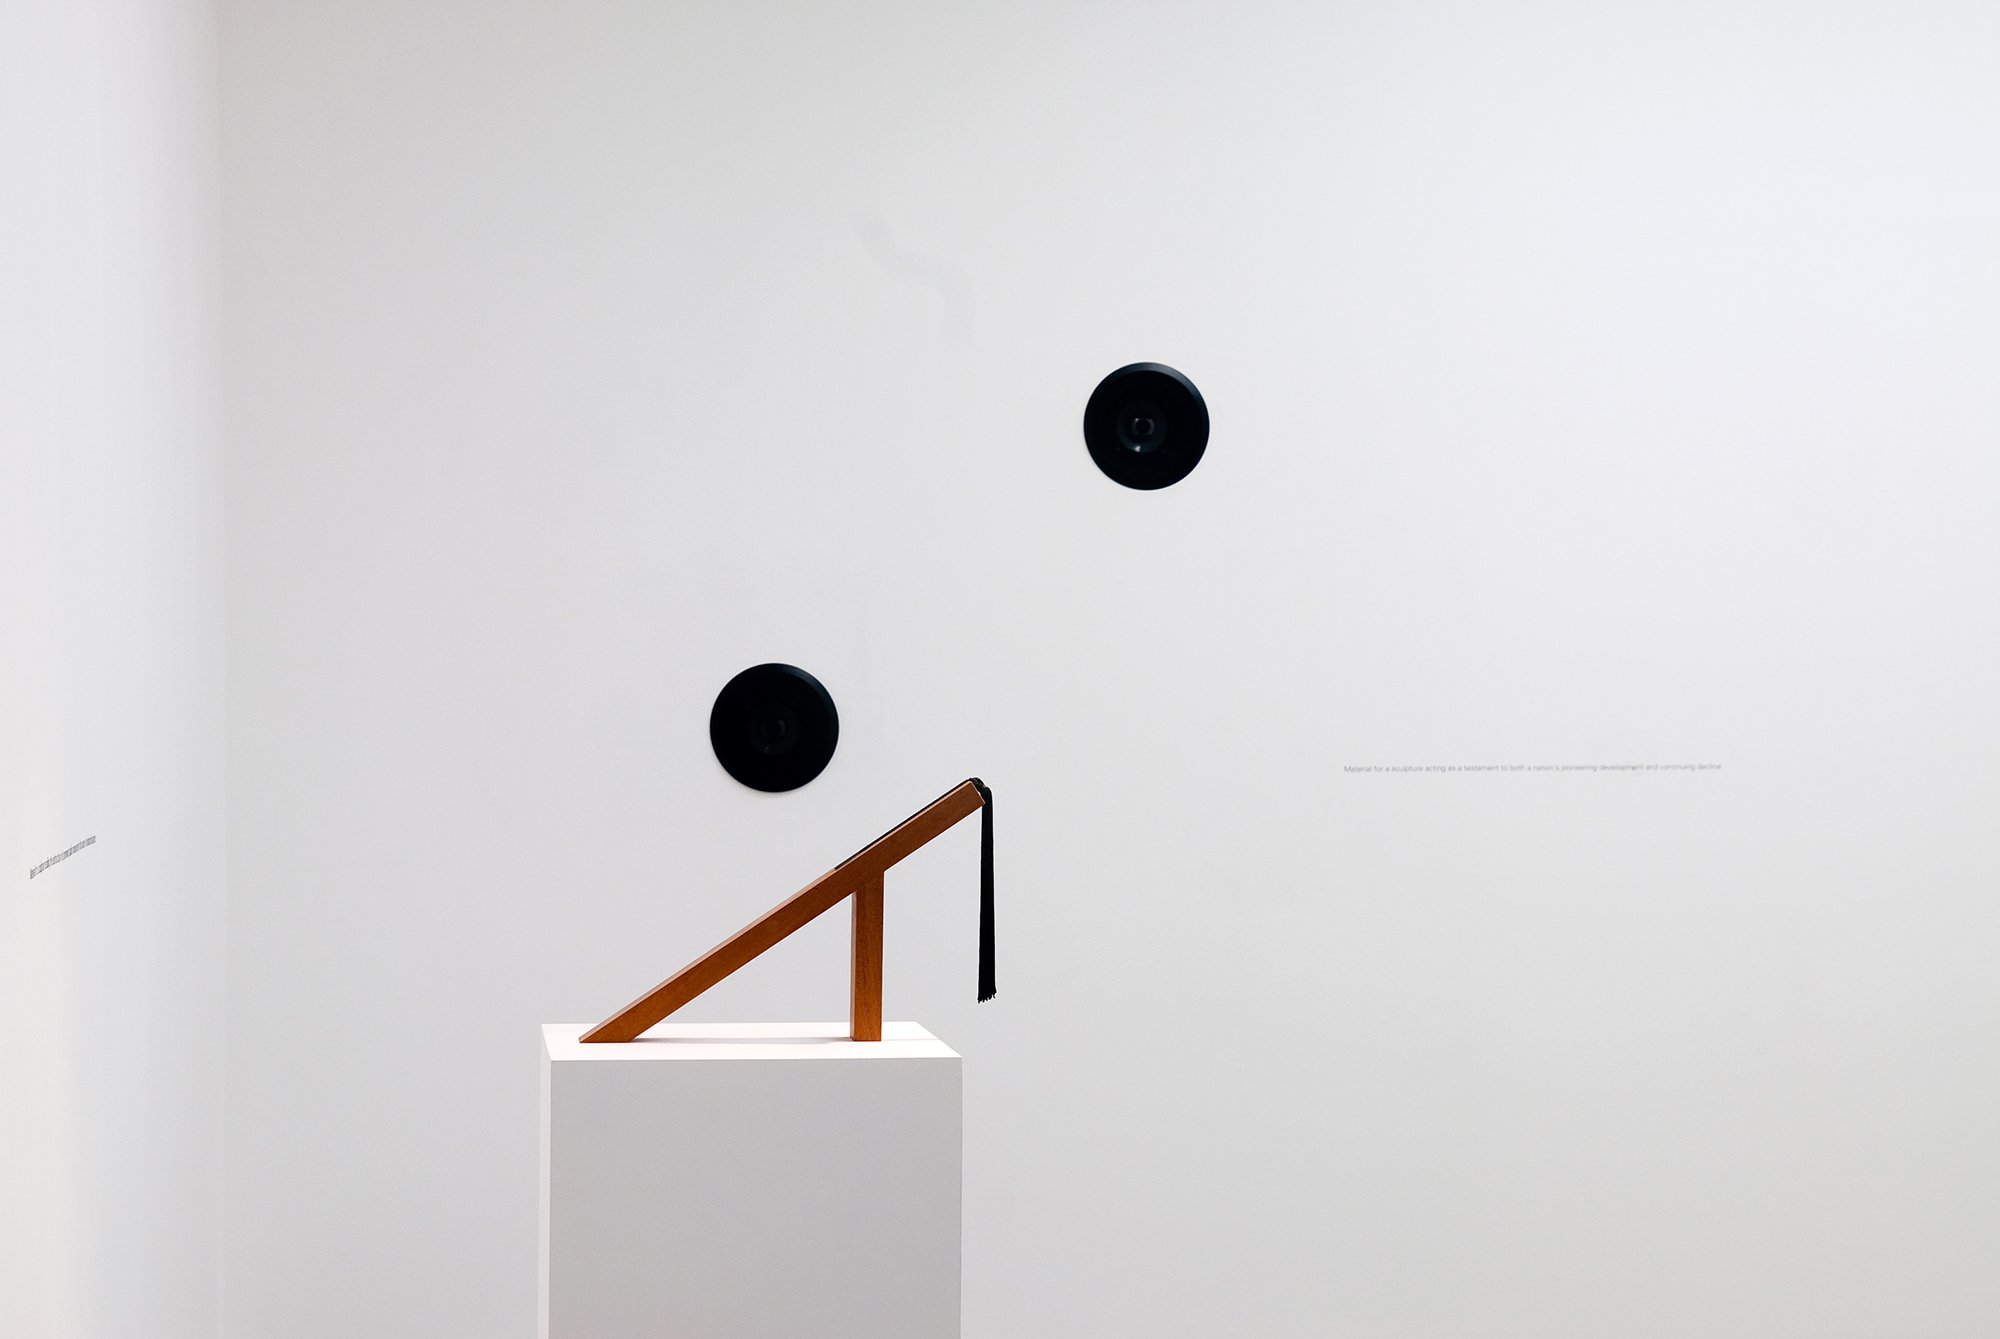 (On plinth) Iman Issa, Material for a sculpture recalling the destruction of a prominent public monument in the name of national resistance, mahogany sculpture with black tassel, white wooden pedestal, 142 x 49 cm, 64 points vinyl writing, 2010. (On wall) Iman Issa,  Material for a sculpture acting as a testament to both a nation’s pioneering development and continuing decline, sound installation, 10 sec. sound in 5 min., interval, 64 points vinyl writing, 2011. Installation view, Material, Rodeo, Istanbul, 2011